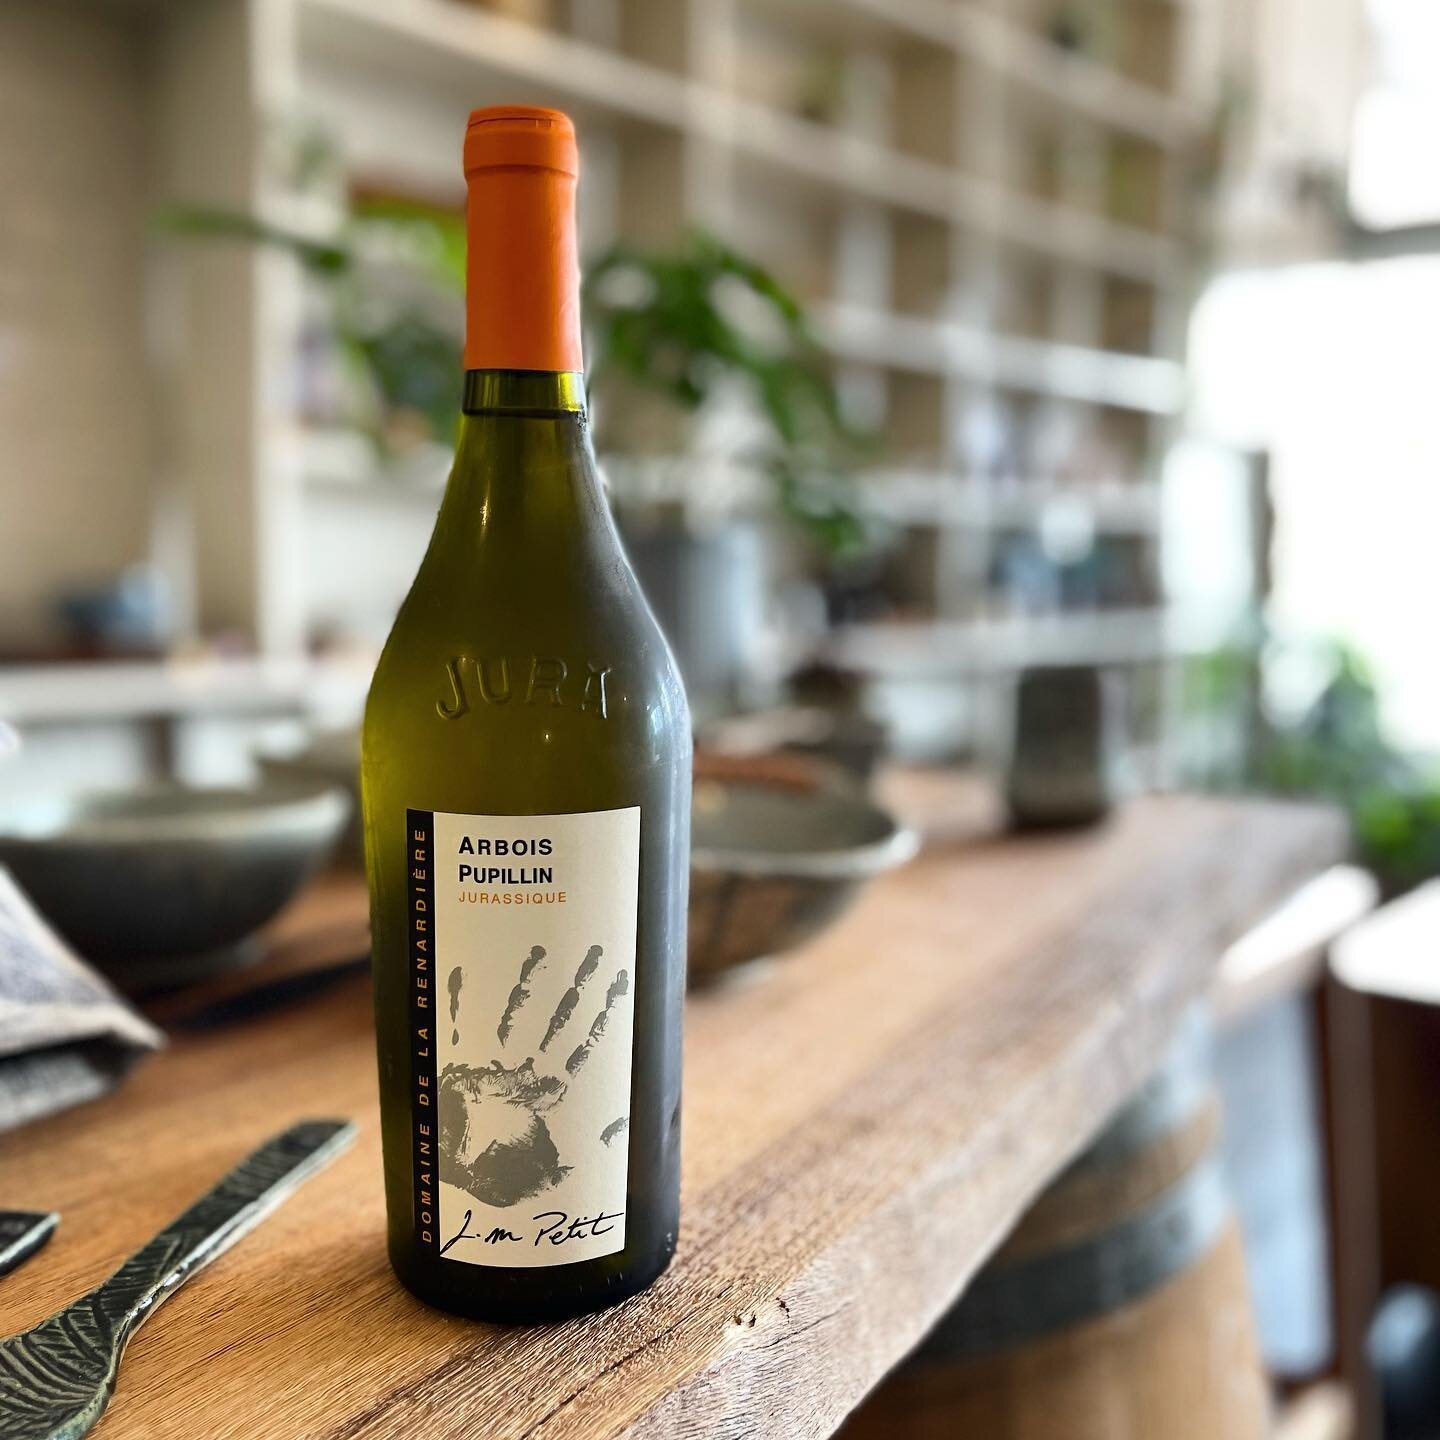 DOMAINE DE LA RENARDI&Egrave;RE Jurassique Jura Chardonnay 2016
It&rsquo;s Chardonnay day and I&rsquo;m a week post Covid. Happy to report that I didn&rsquo;t lose my taste and smell, something I have been worrying about the last couple of years. In 